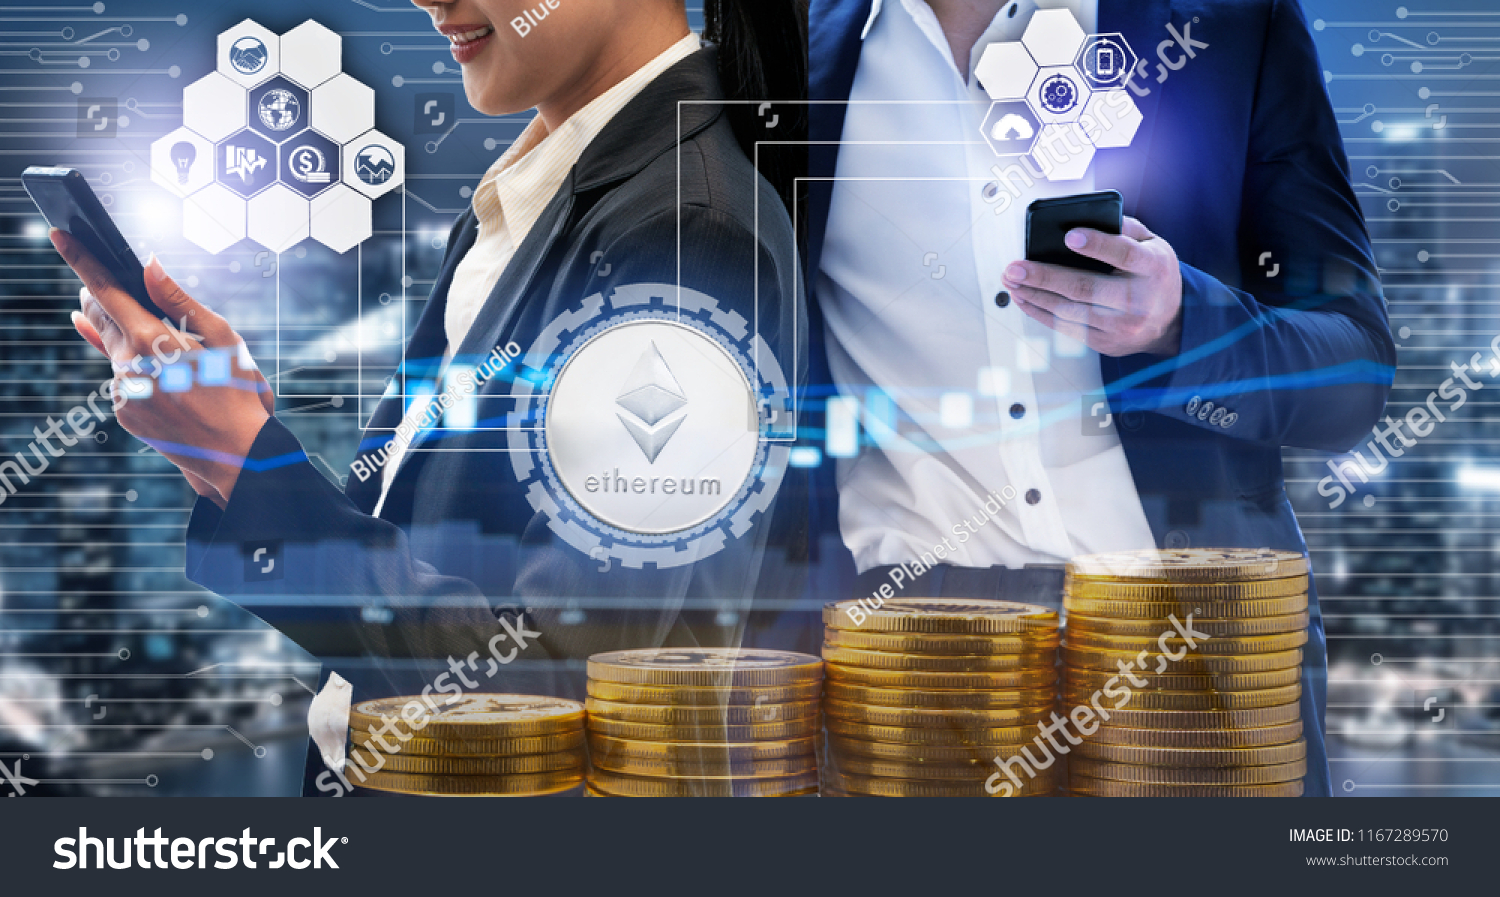 Ethereum and cryptocurrency investing concept - Businessman using mobile phone application to trade Ethereum ETH with another trader in modern graphic interface. Blockchain and financial technology. #1167289570